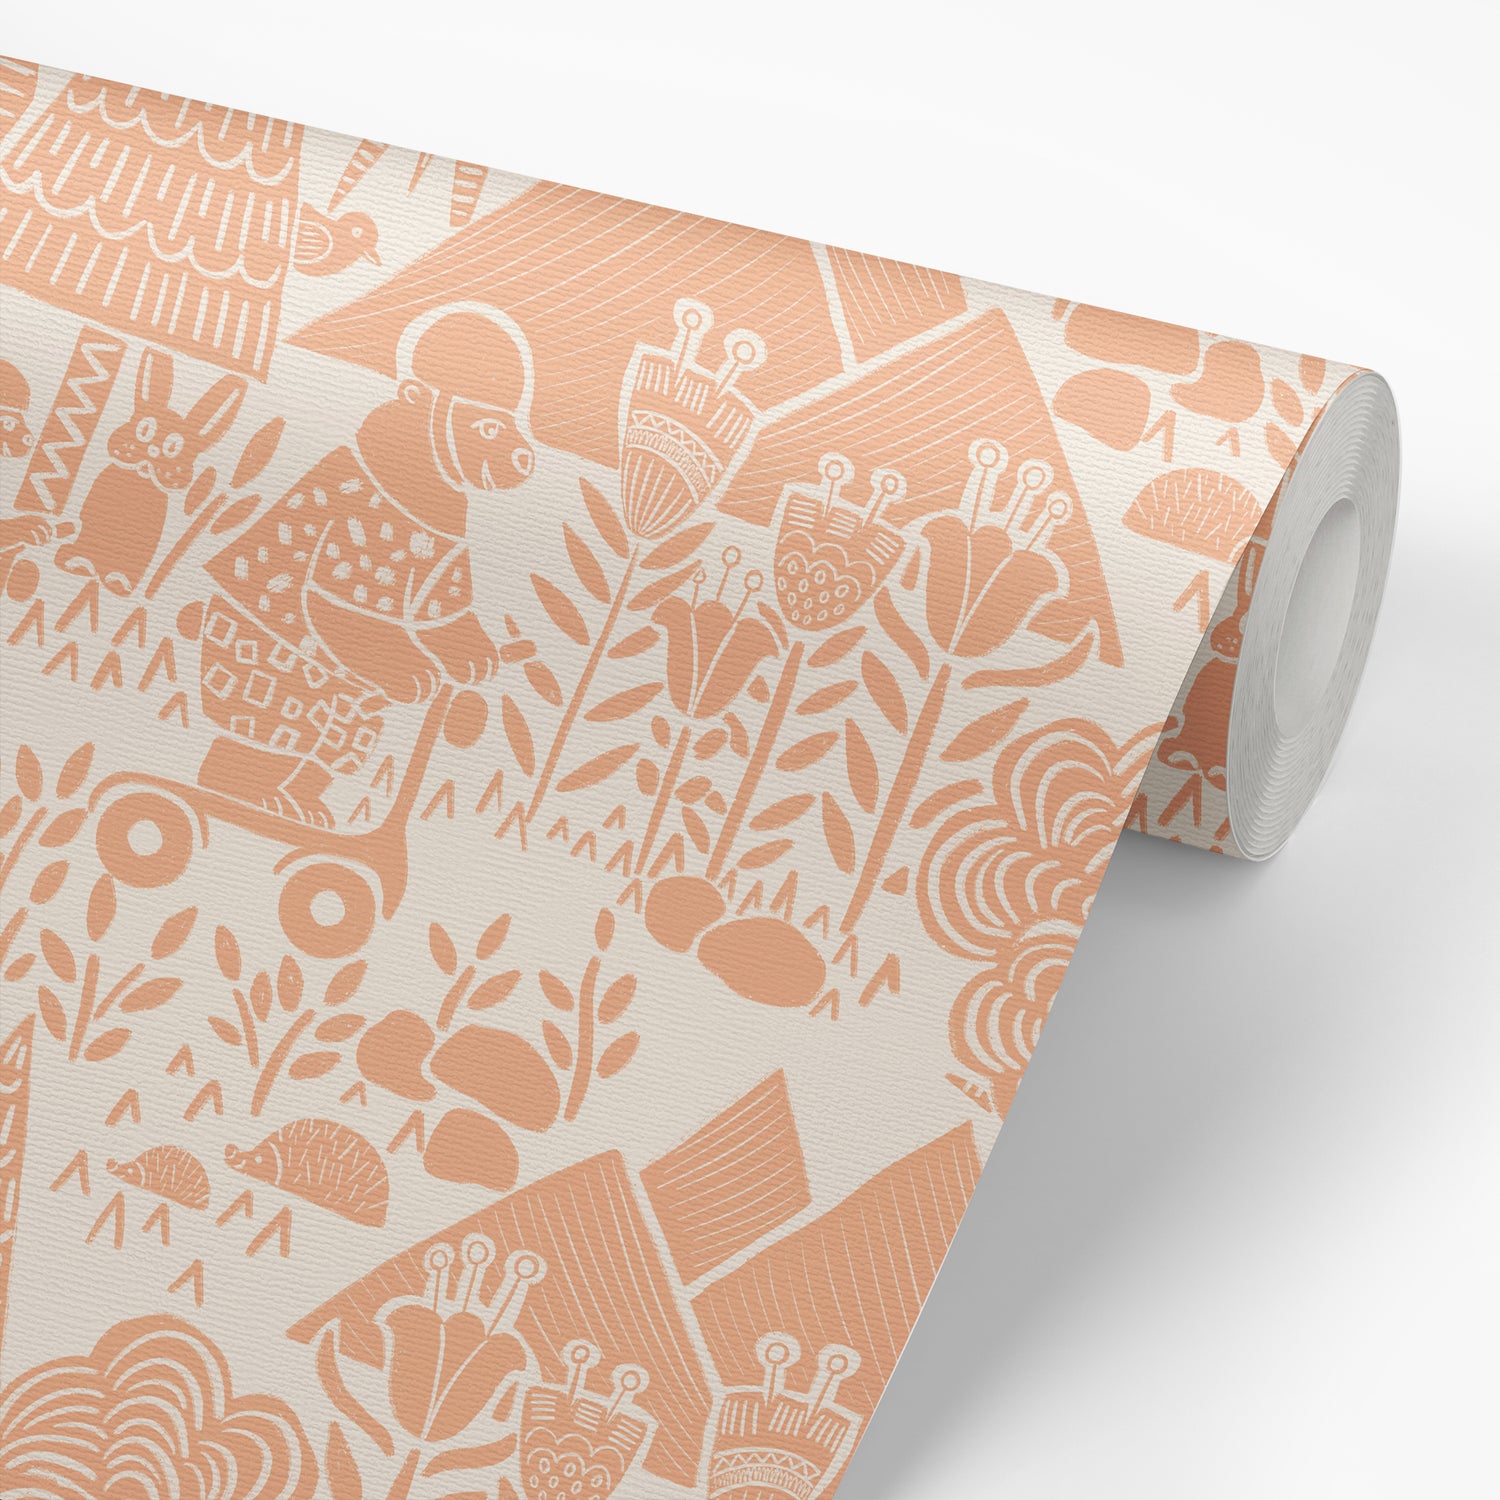 Scooting Bears Wallpaper in Apricot shown on a roll of wallpaper.